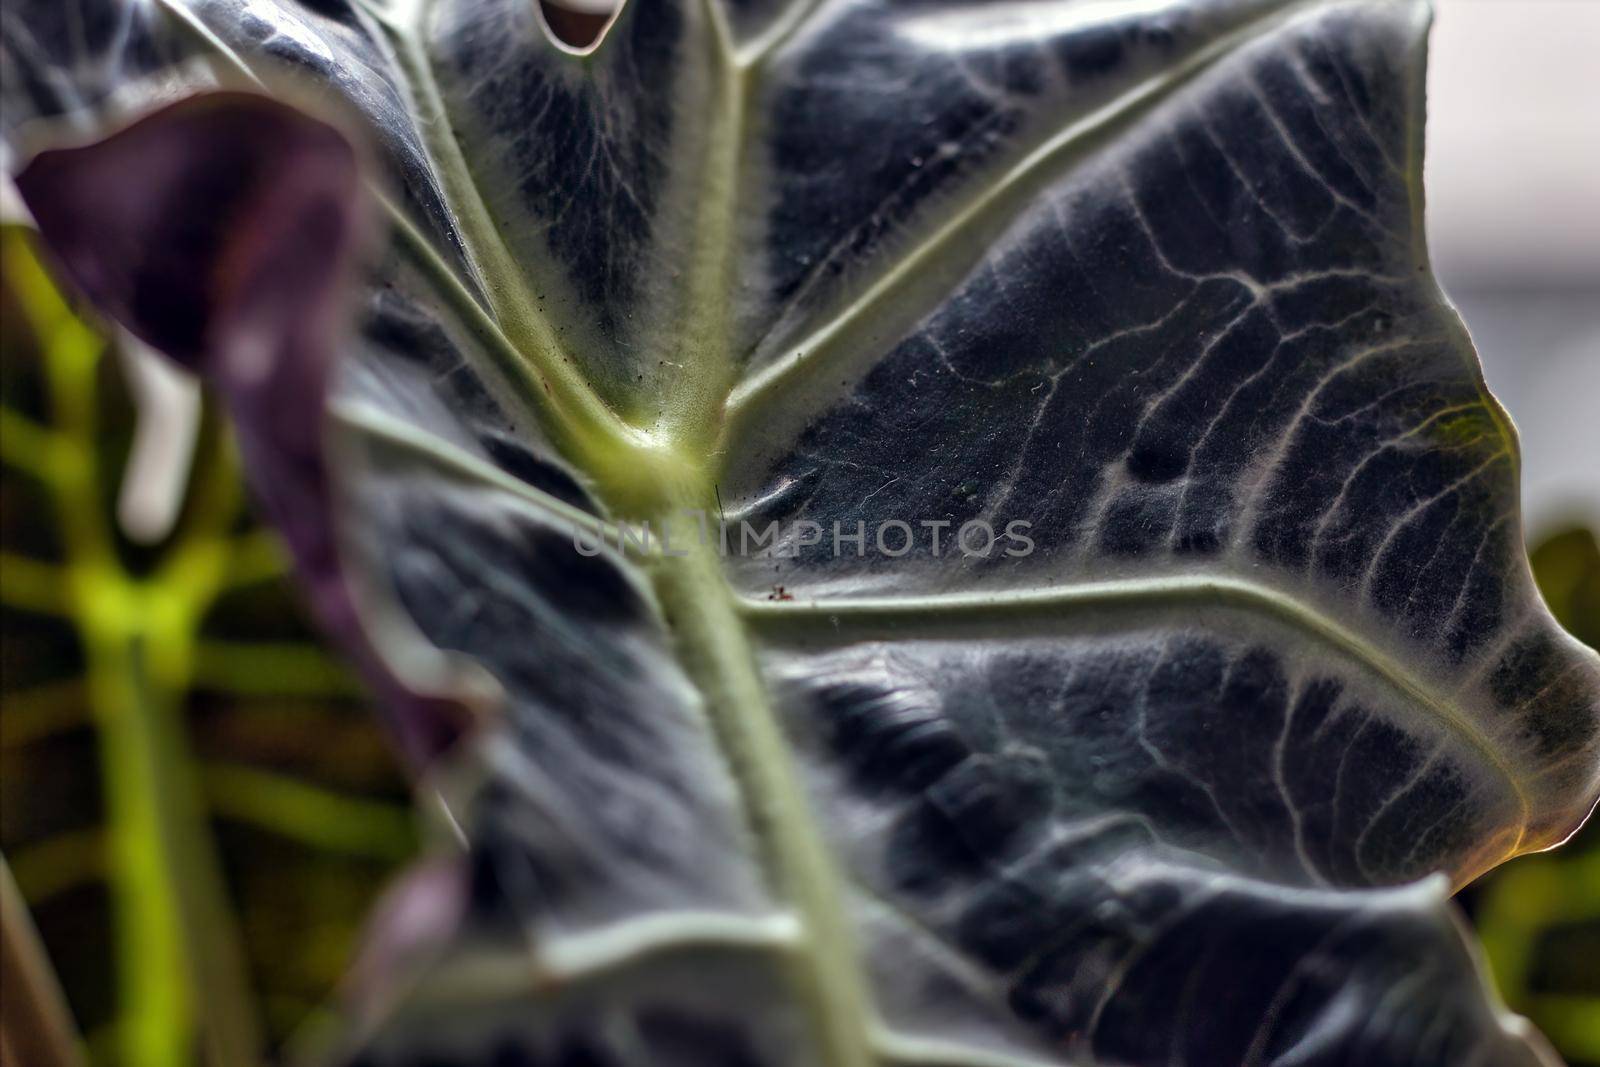 Abstract background shot showing leaf of Alocasia plant, it is a genus of broad-leaved rhizomatous or tuberous perennial flowering plants from the family Araceae.